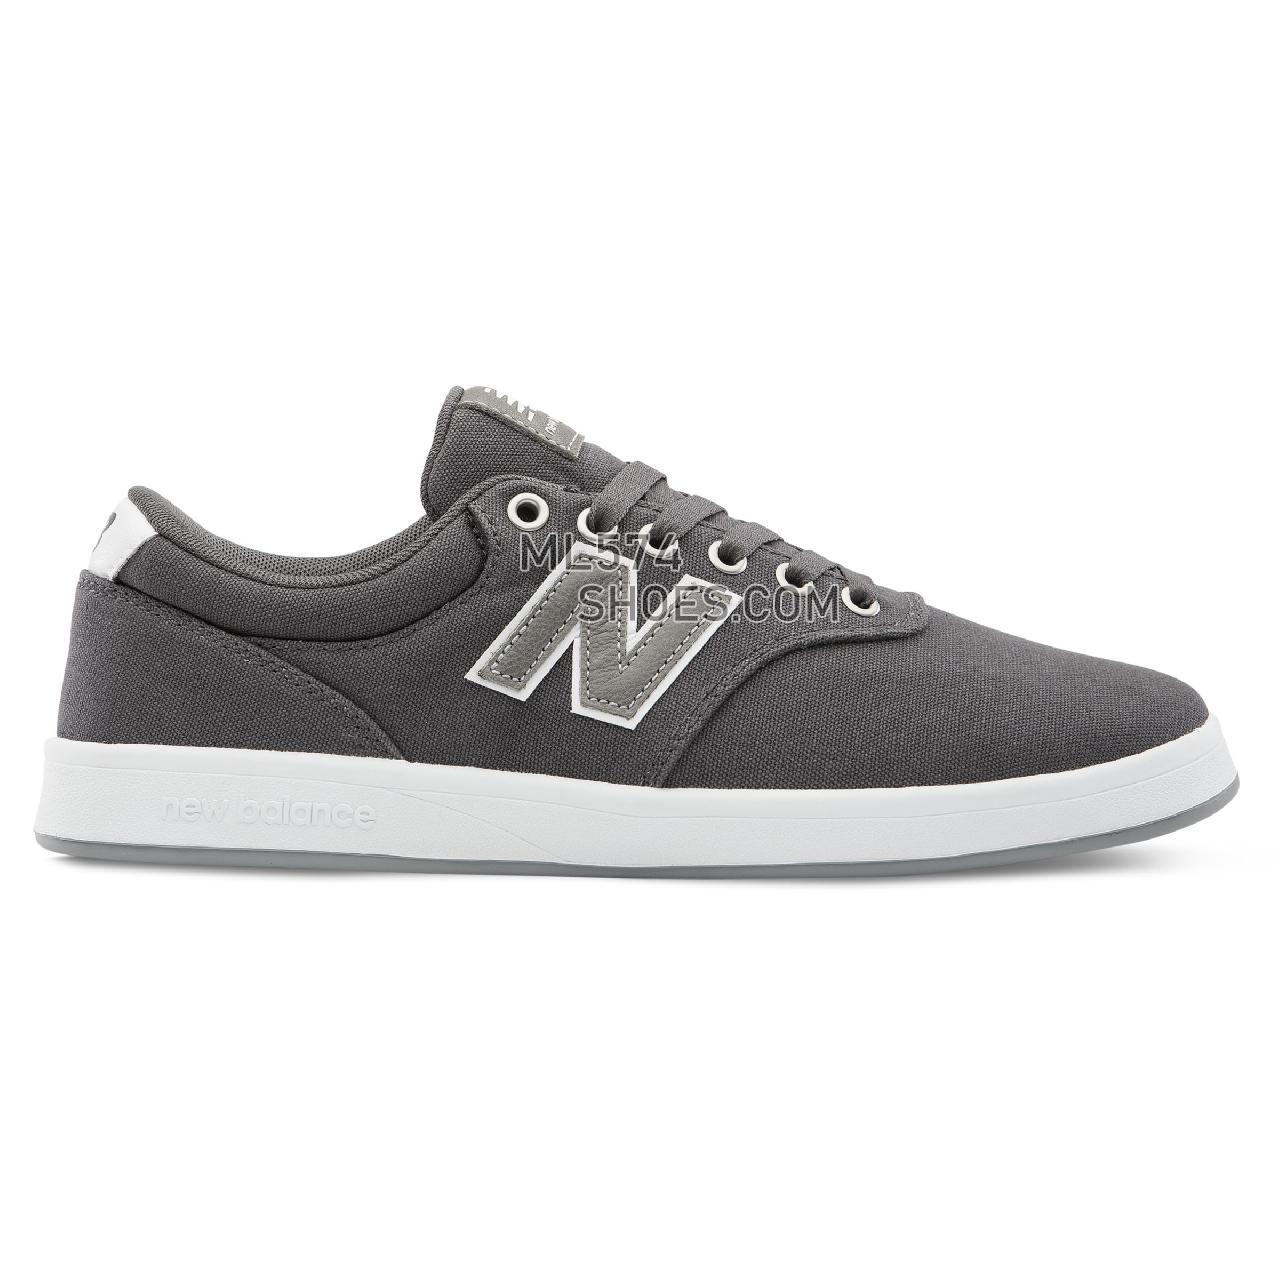 New Balance 424 - Men's 424 - Classic Heather Grey with Frost Grey - AM424GWT